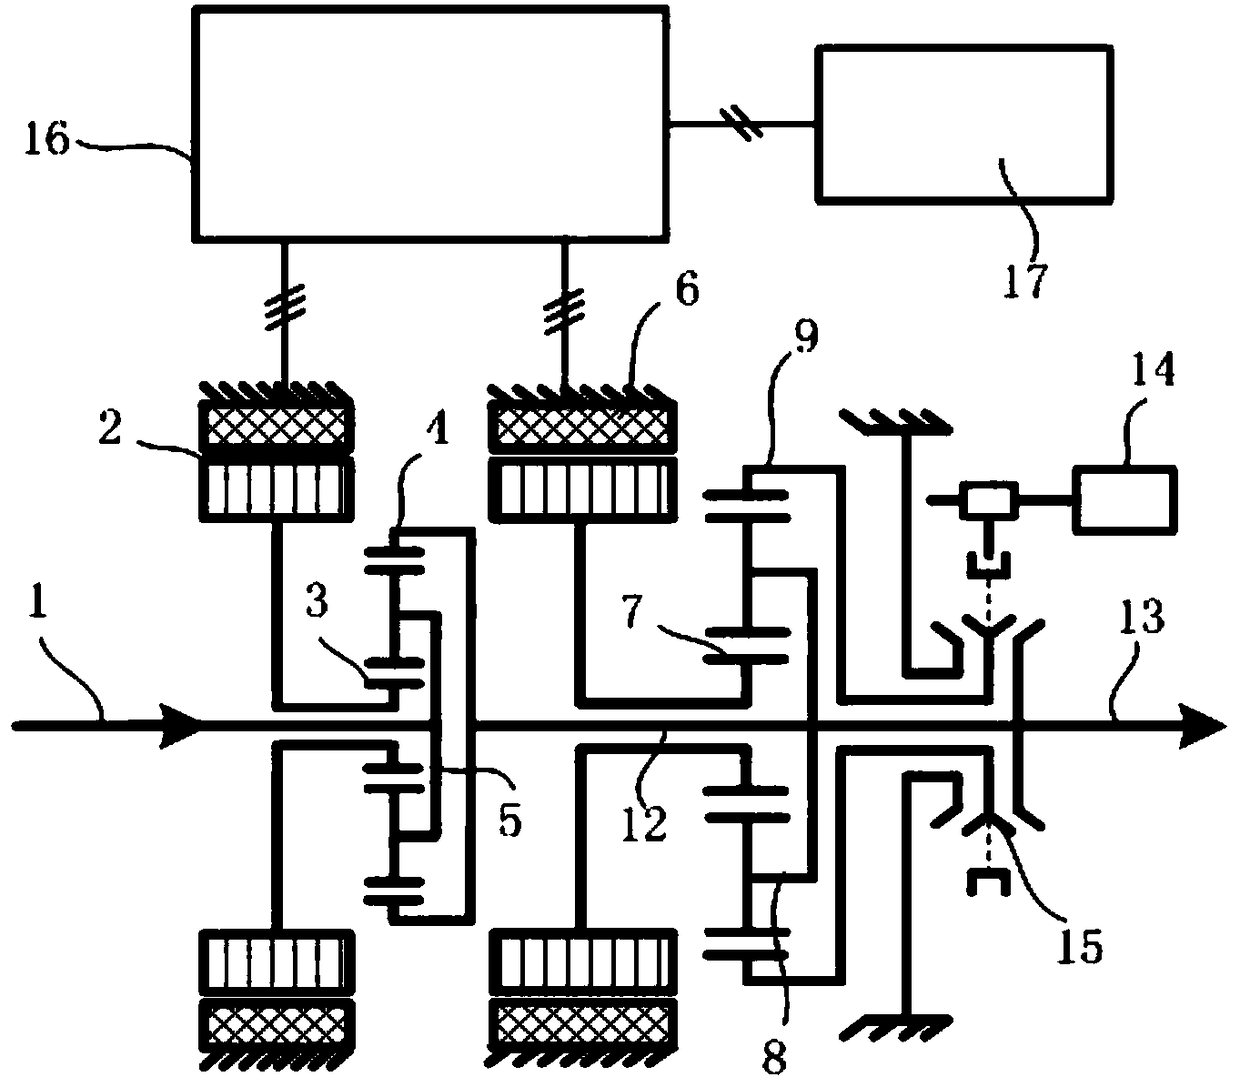 A single-mode two-gear power splitting hybrid transmission device of a commercial vehicle